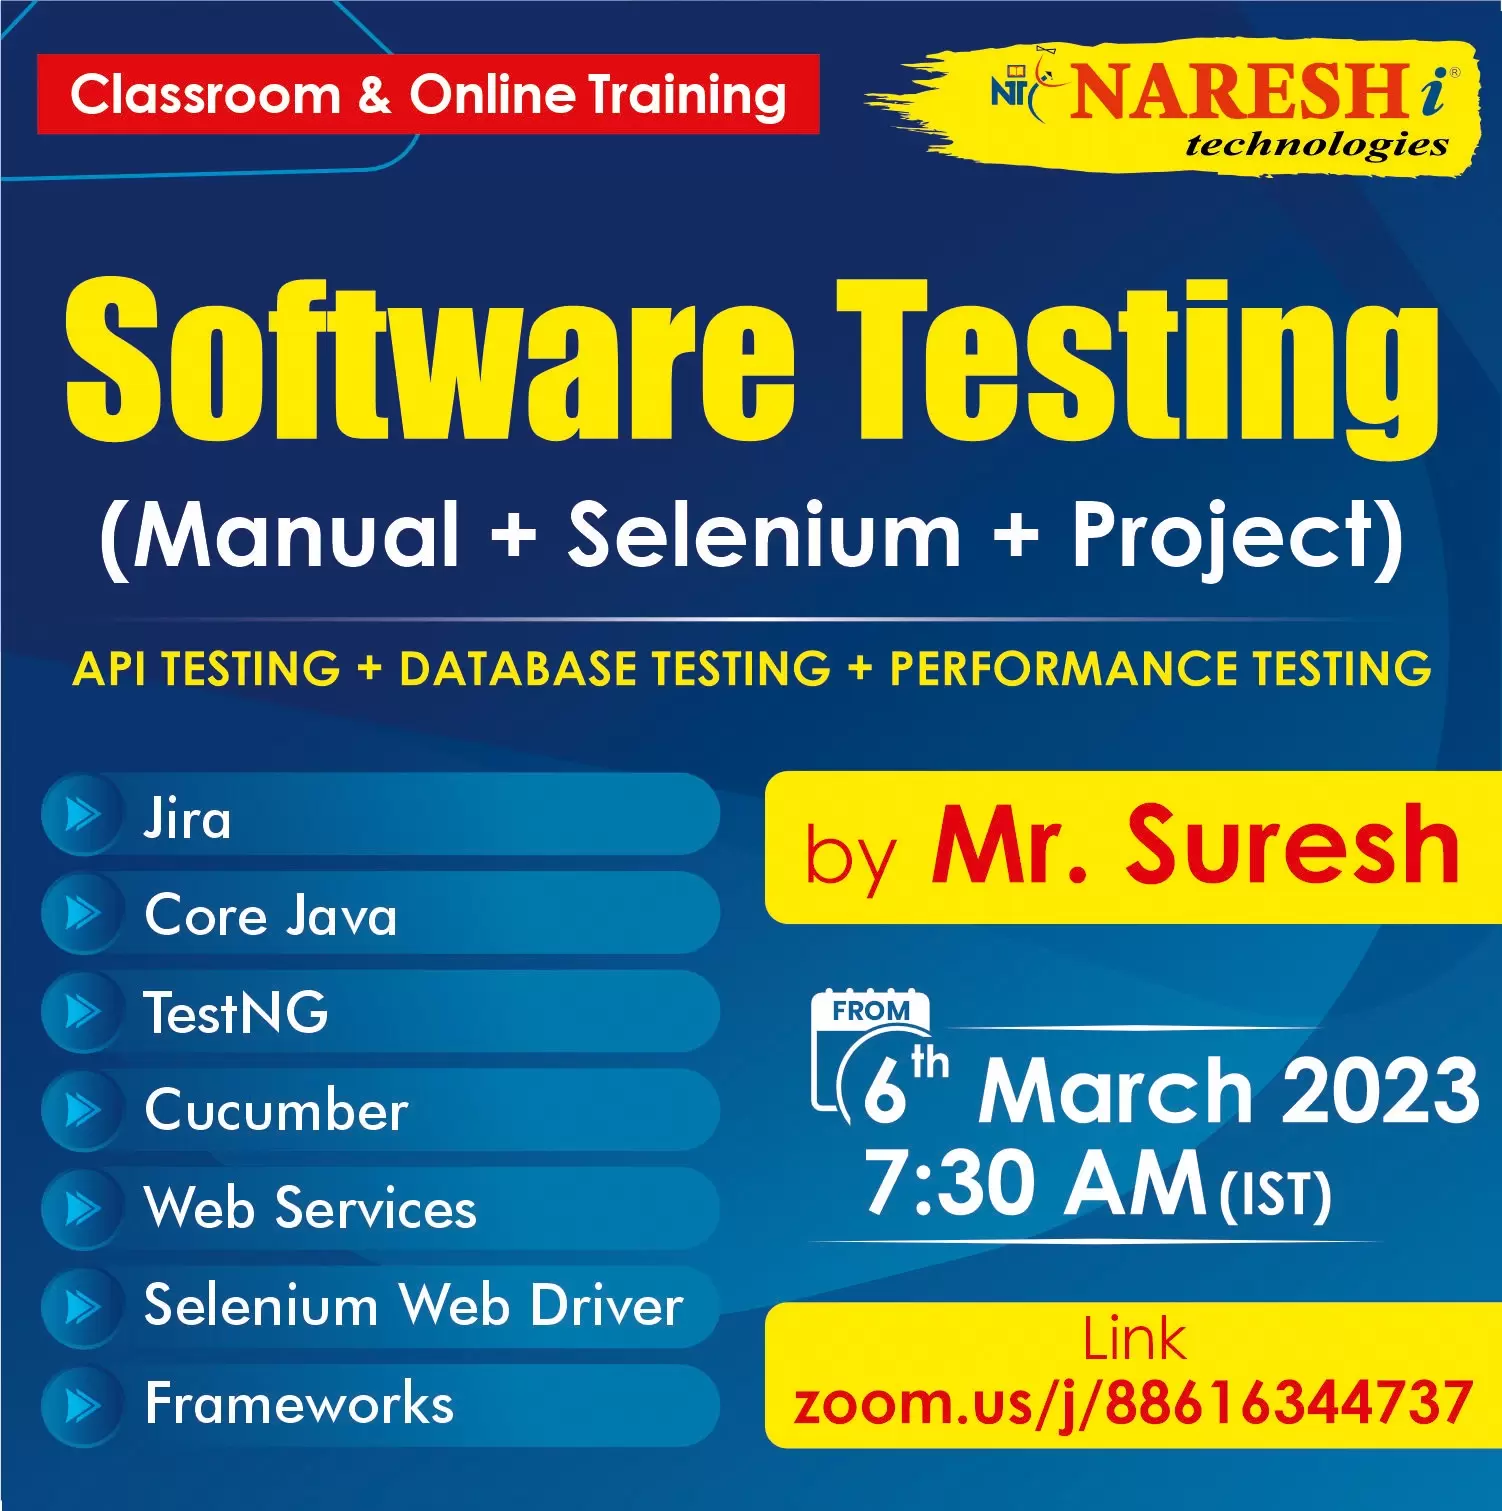 Free Online Demo On Software Testing By Mr. Suresh - NareshIT